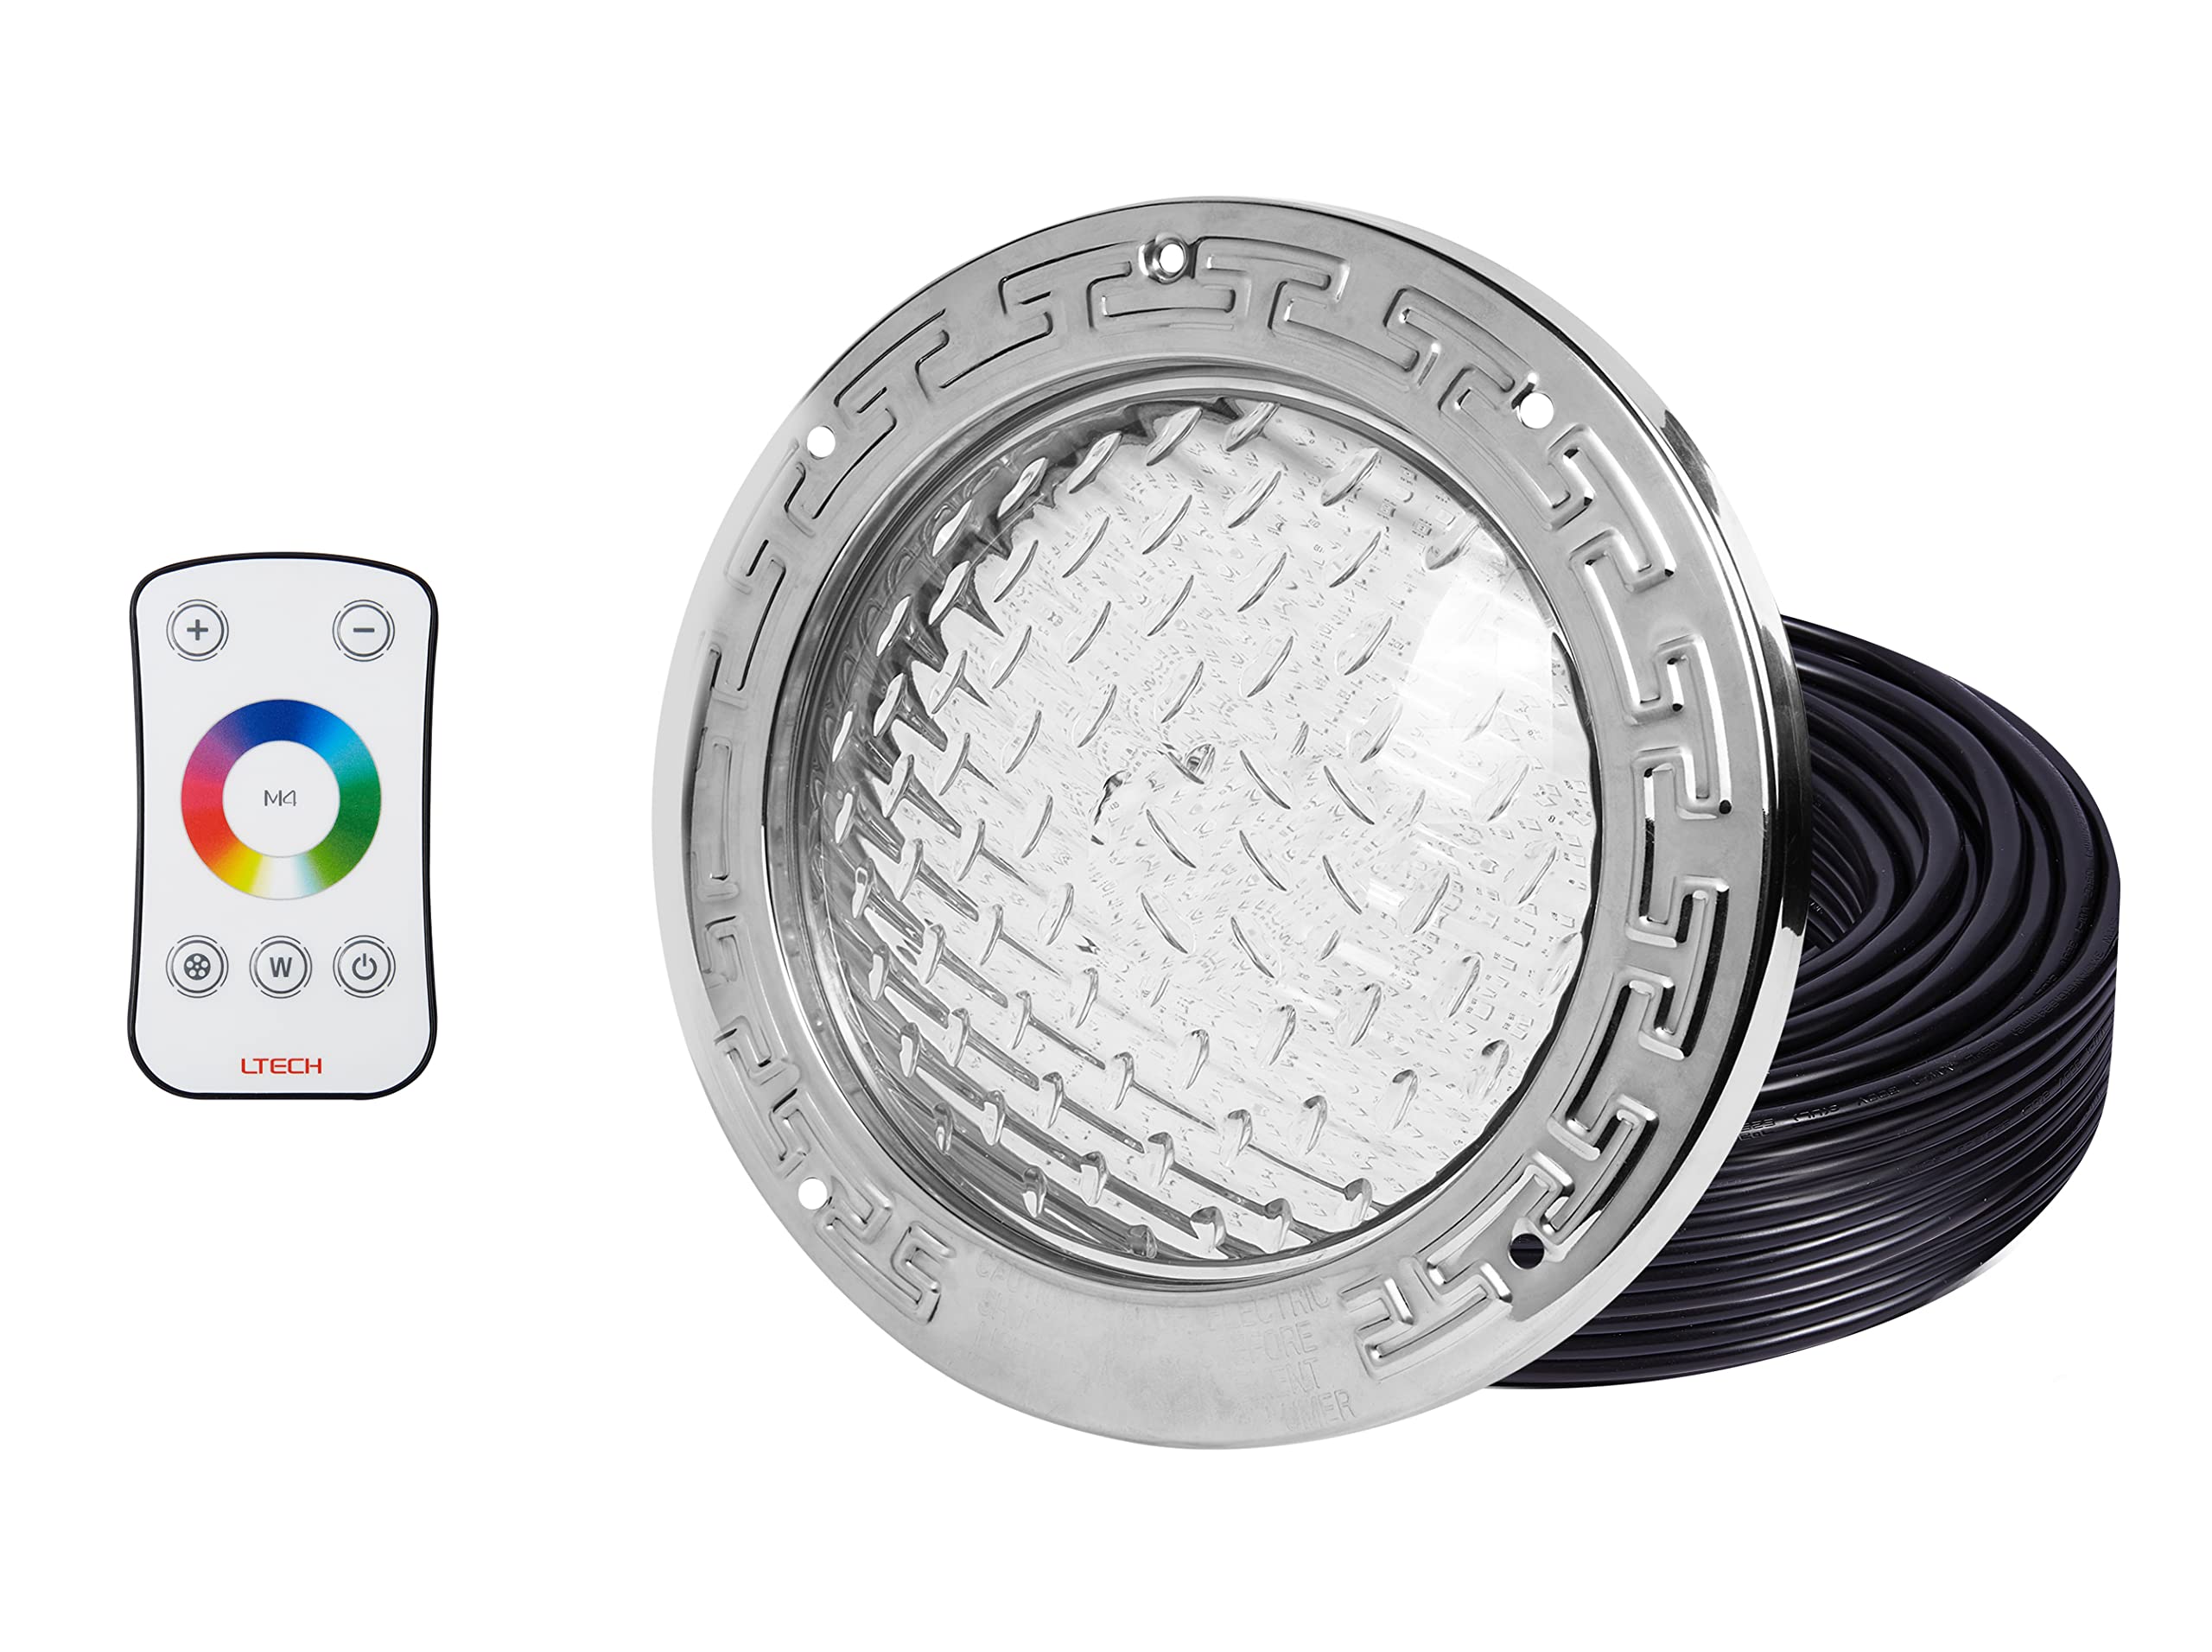 HQUA PN01DC 120V AC LED RGBW Color Change Inground Pool Light, 10 Inch 35W 3000lm (300W Incandescent Equivalent), with 100” Cord, Transformer Included, UL Listed, Fit for 10